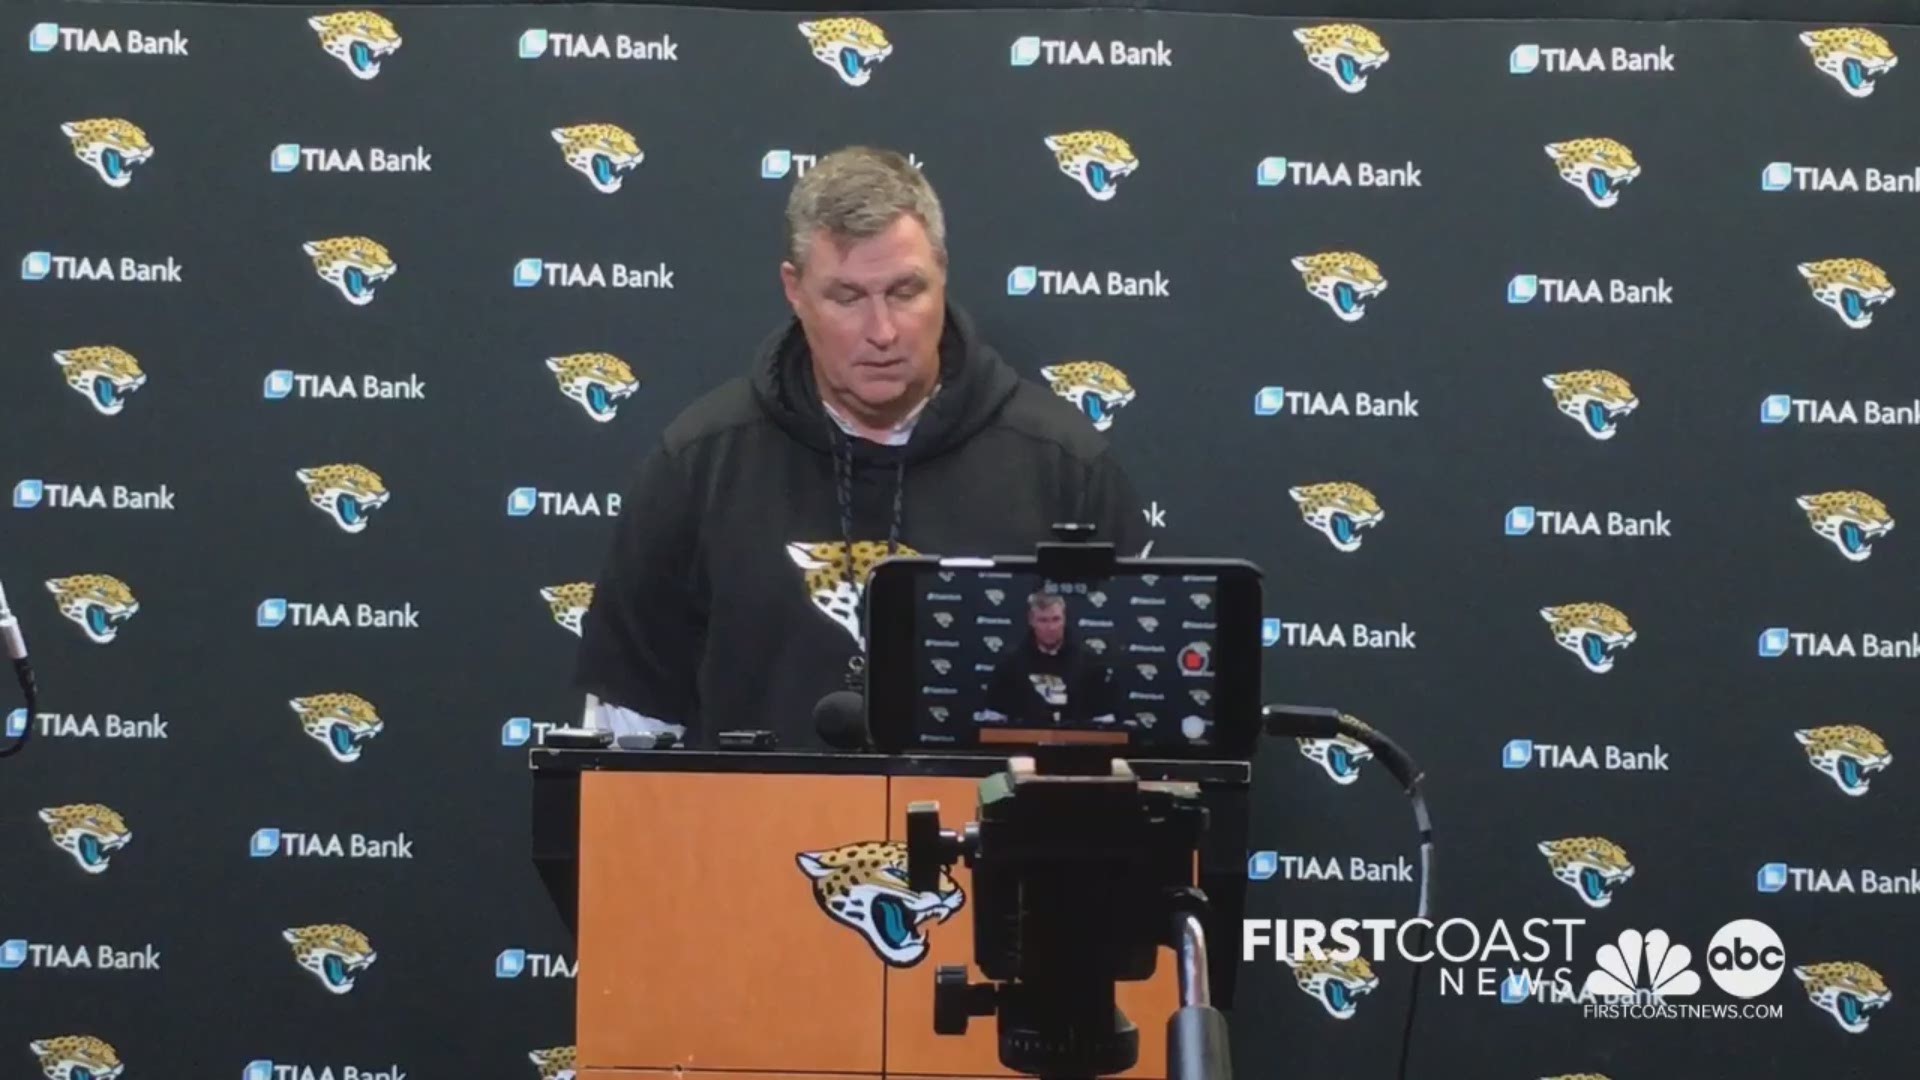 Jaguars Head Coach Doug Marrone discussed the state of his team Wednesday following Jacksonville's six straight loses.